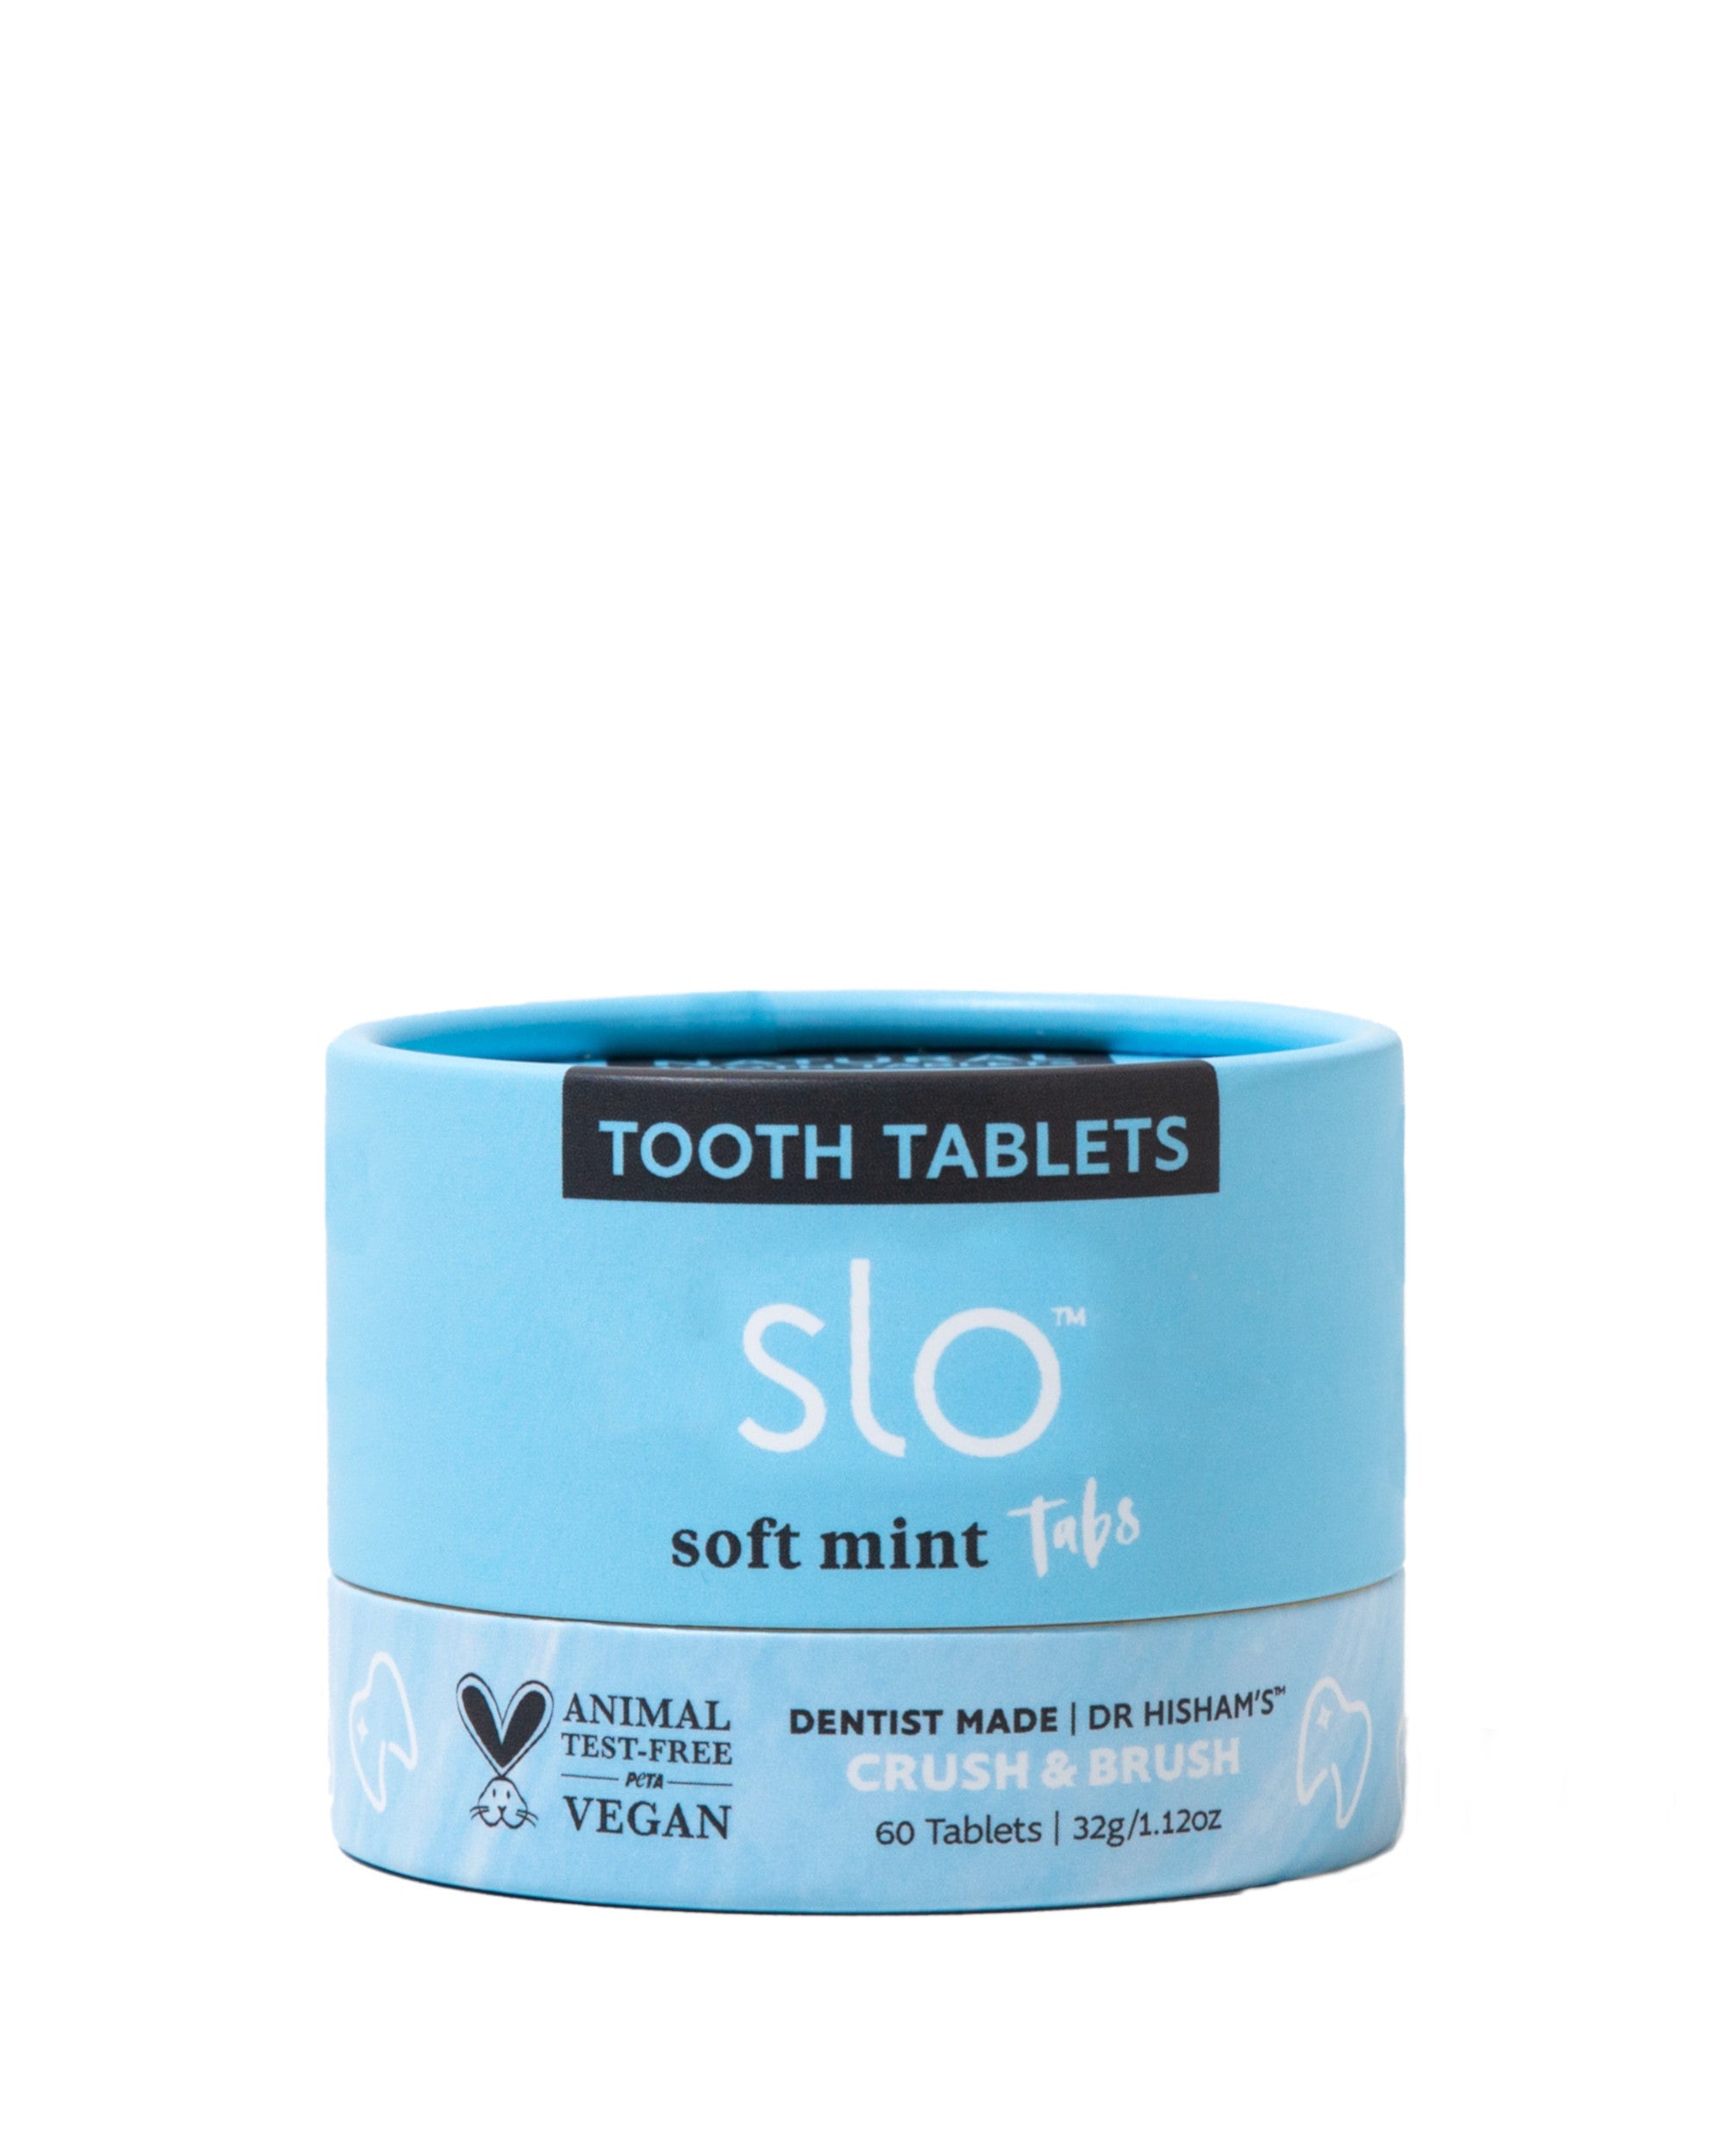 Tooth Tablets - Box of Soft Mint Tubs